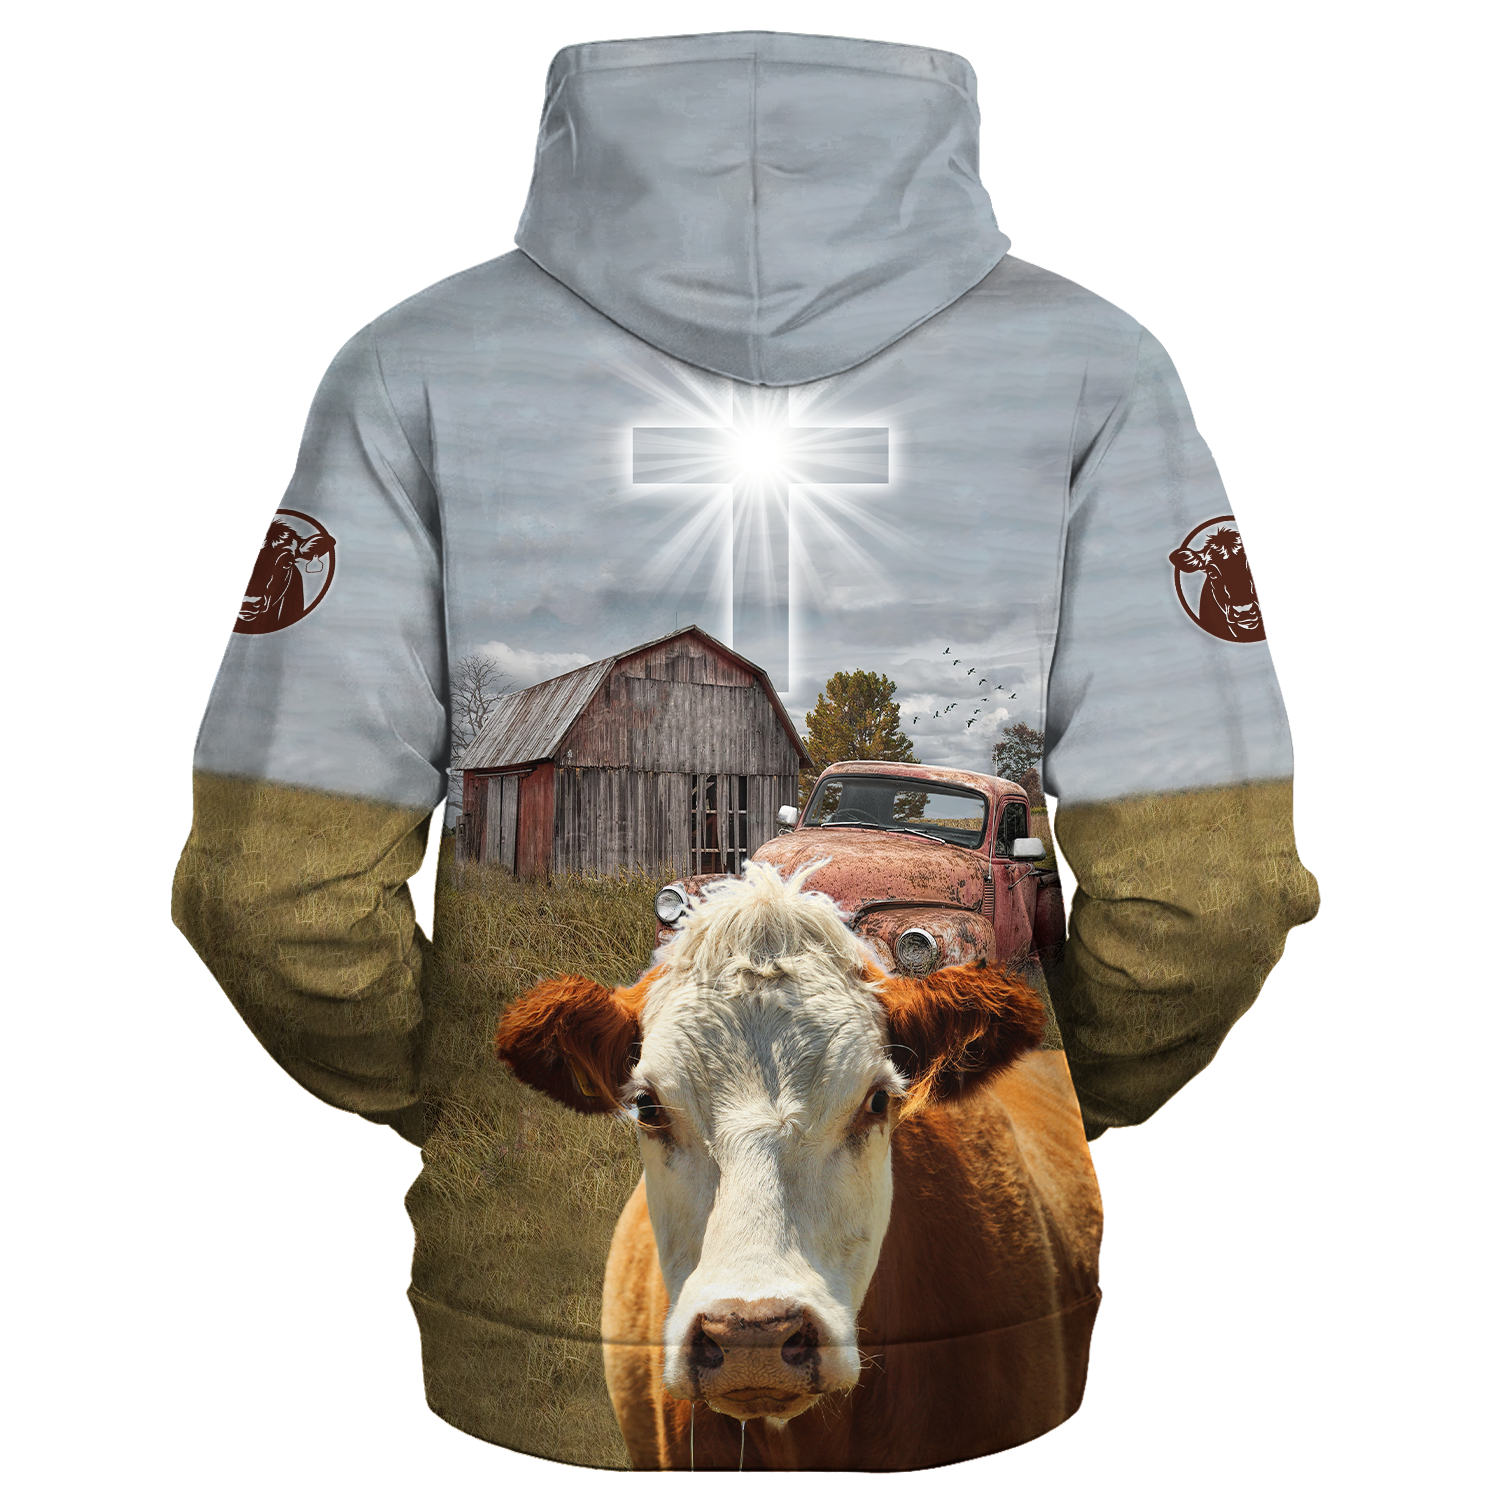 Hereford 3D All Over Print On Hoodie/ So God Made A Farmer